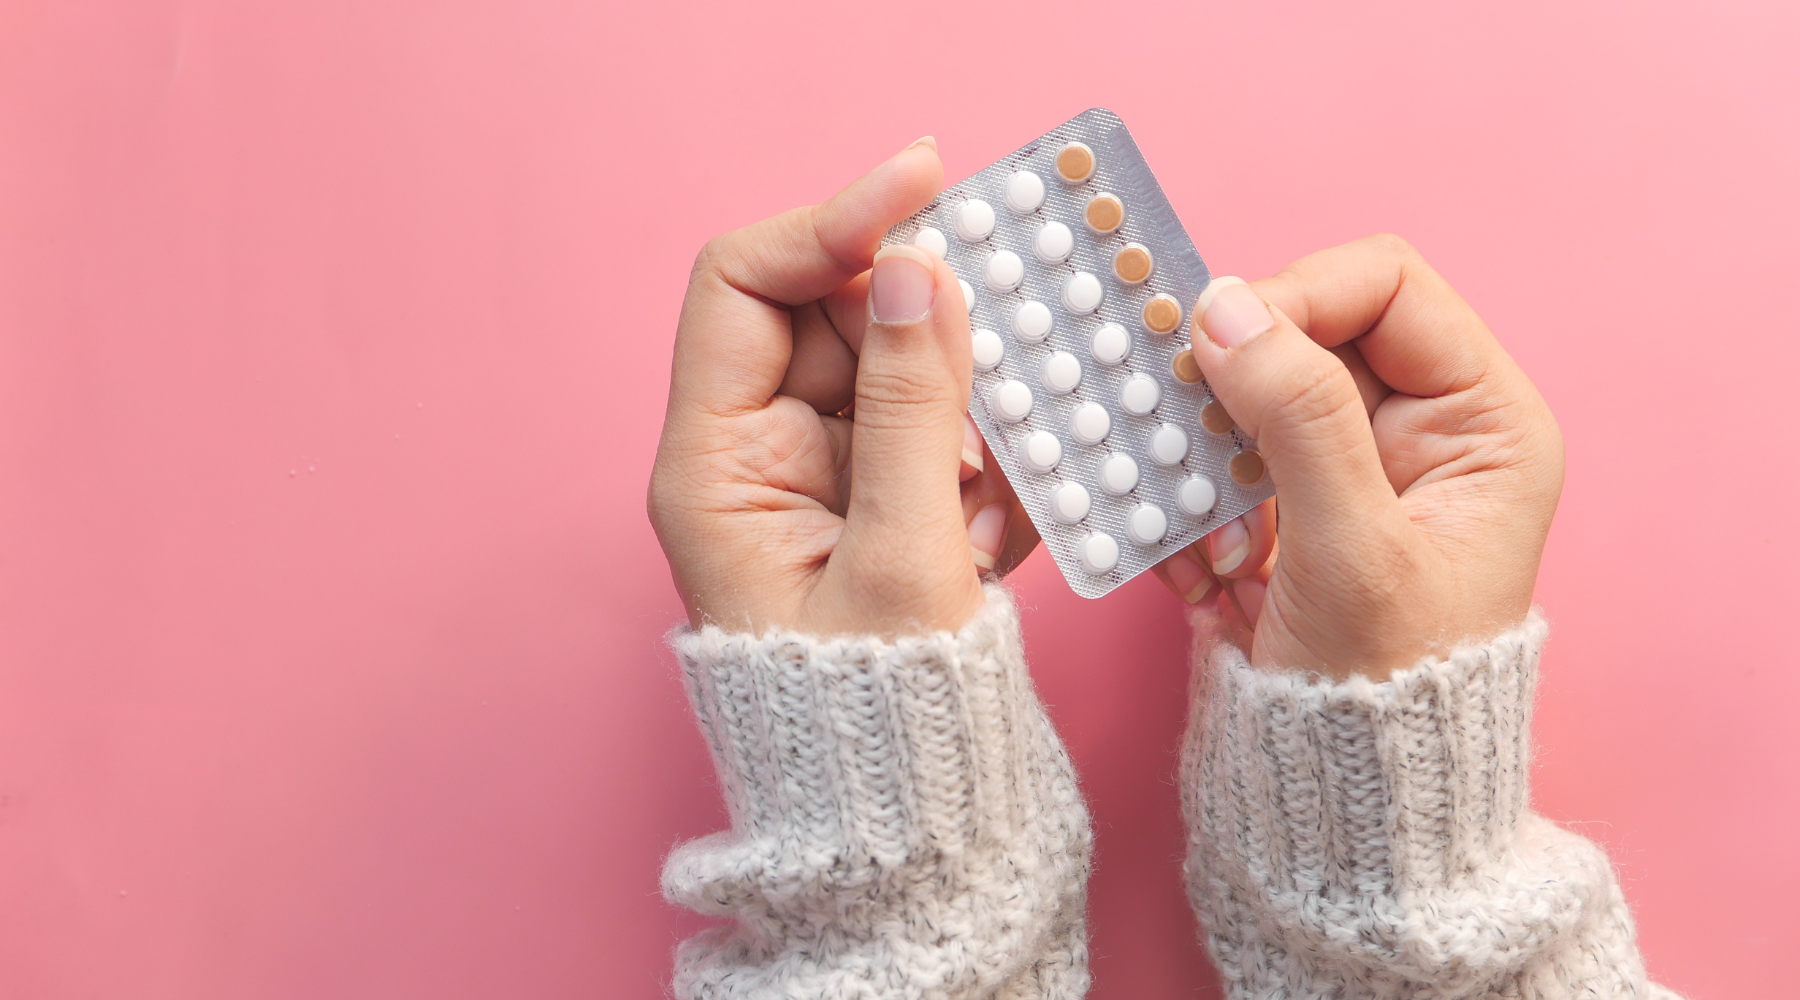 hands holding birth control pill